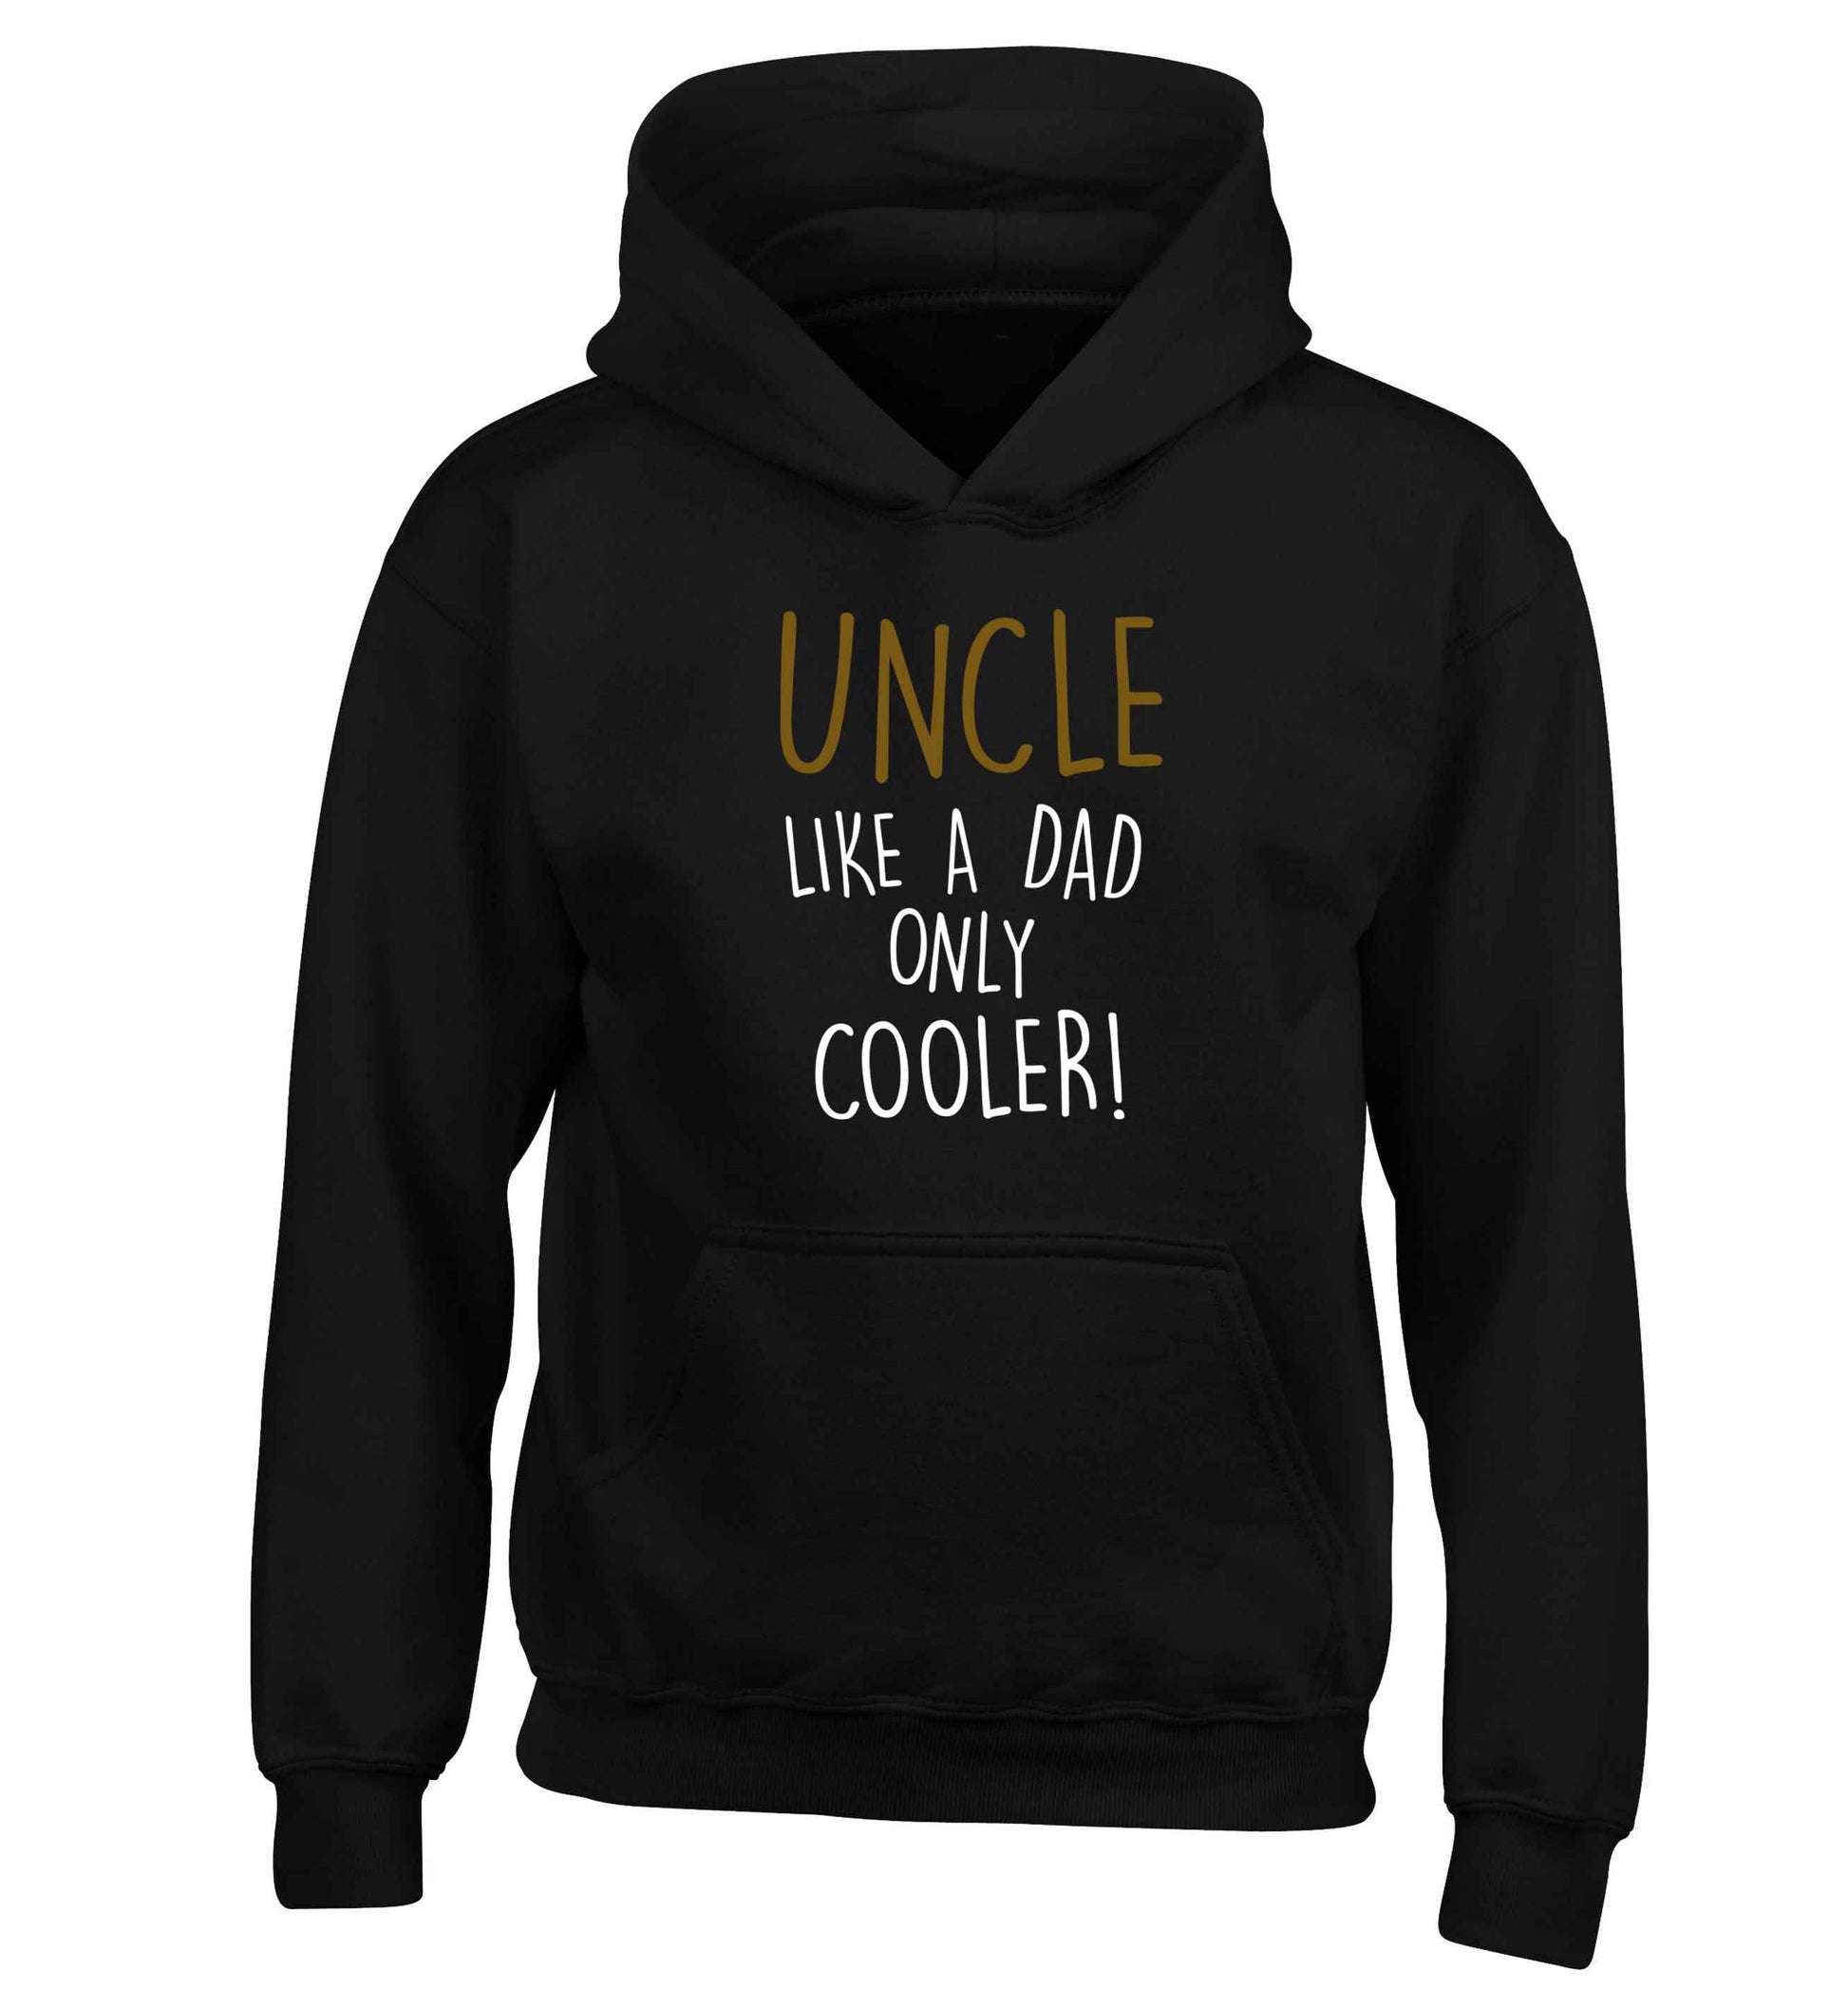 Uncle like a dad only cooler children's black hoodie 12-13 Years